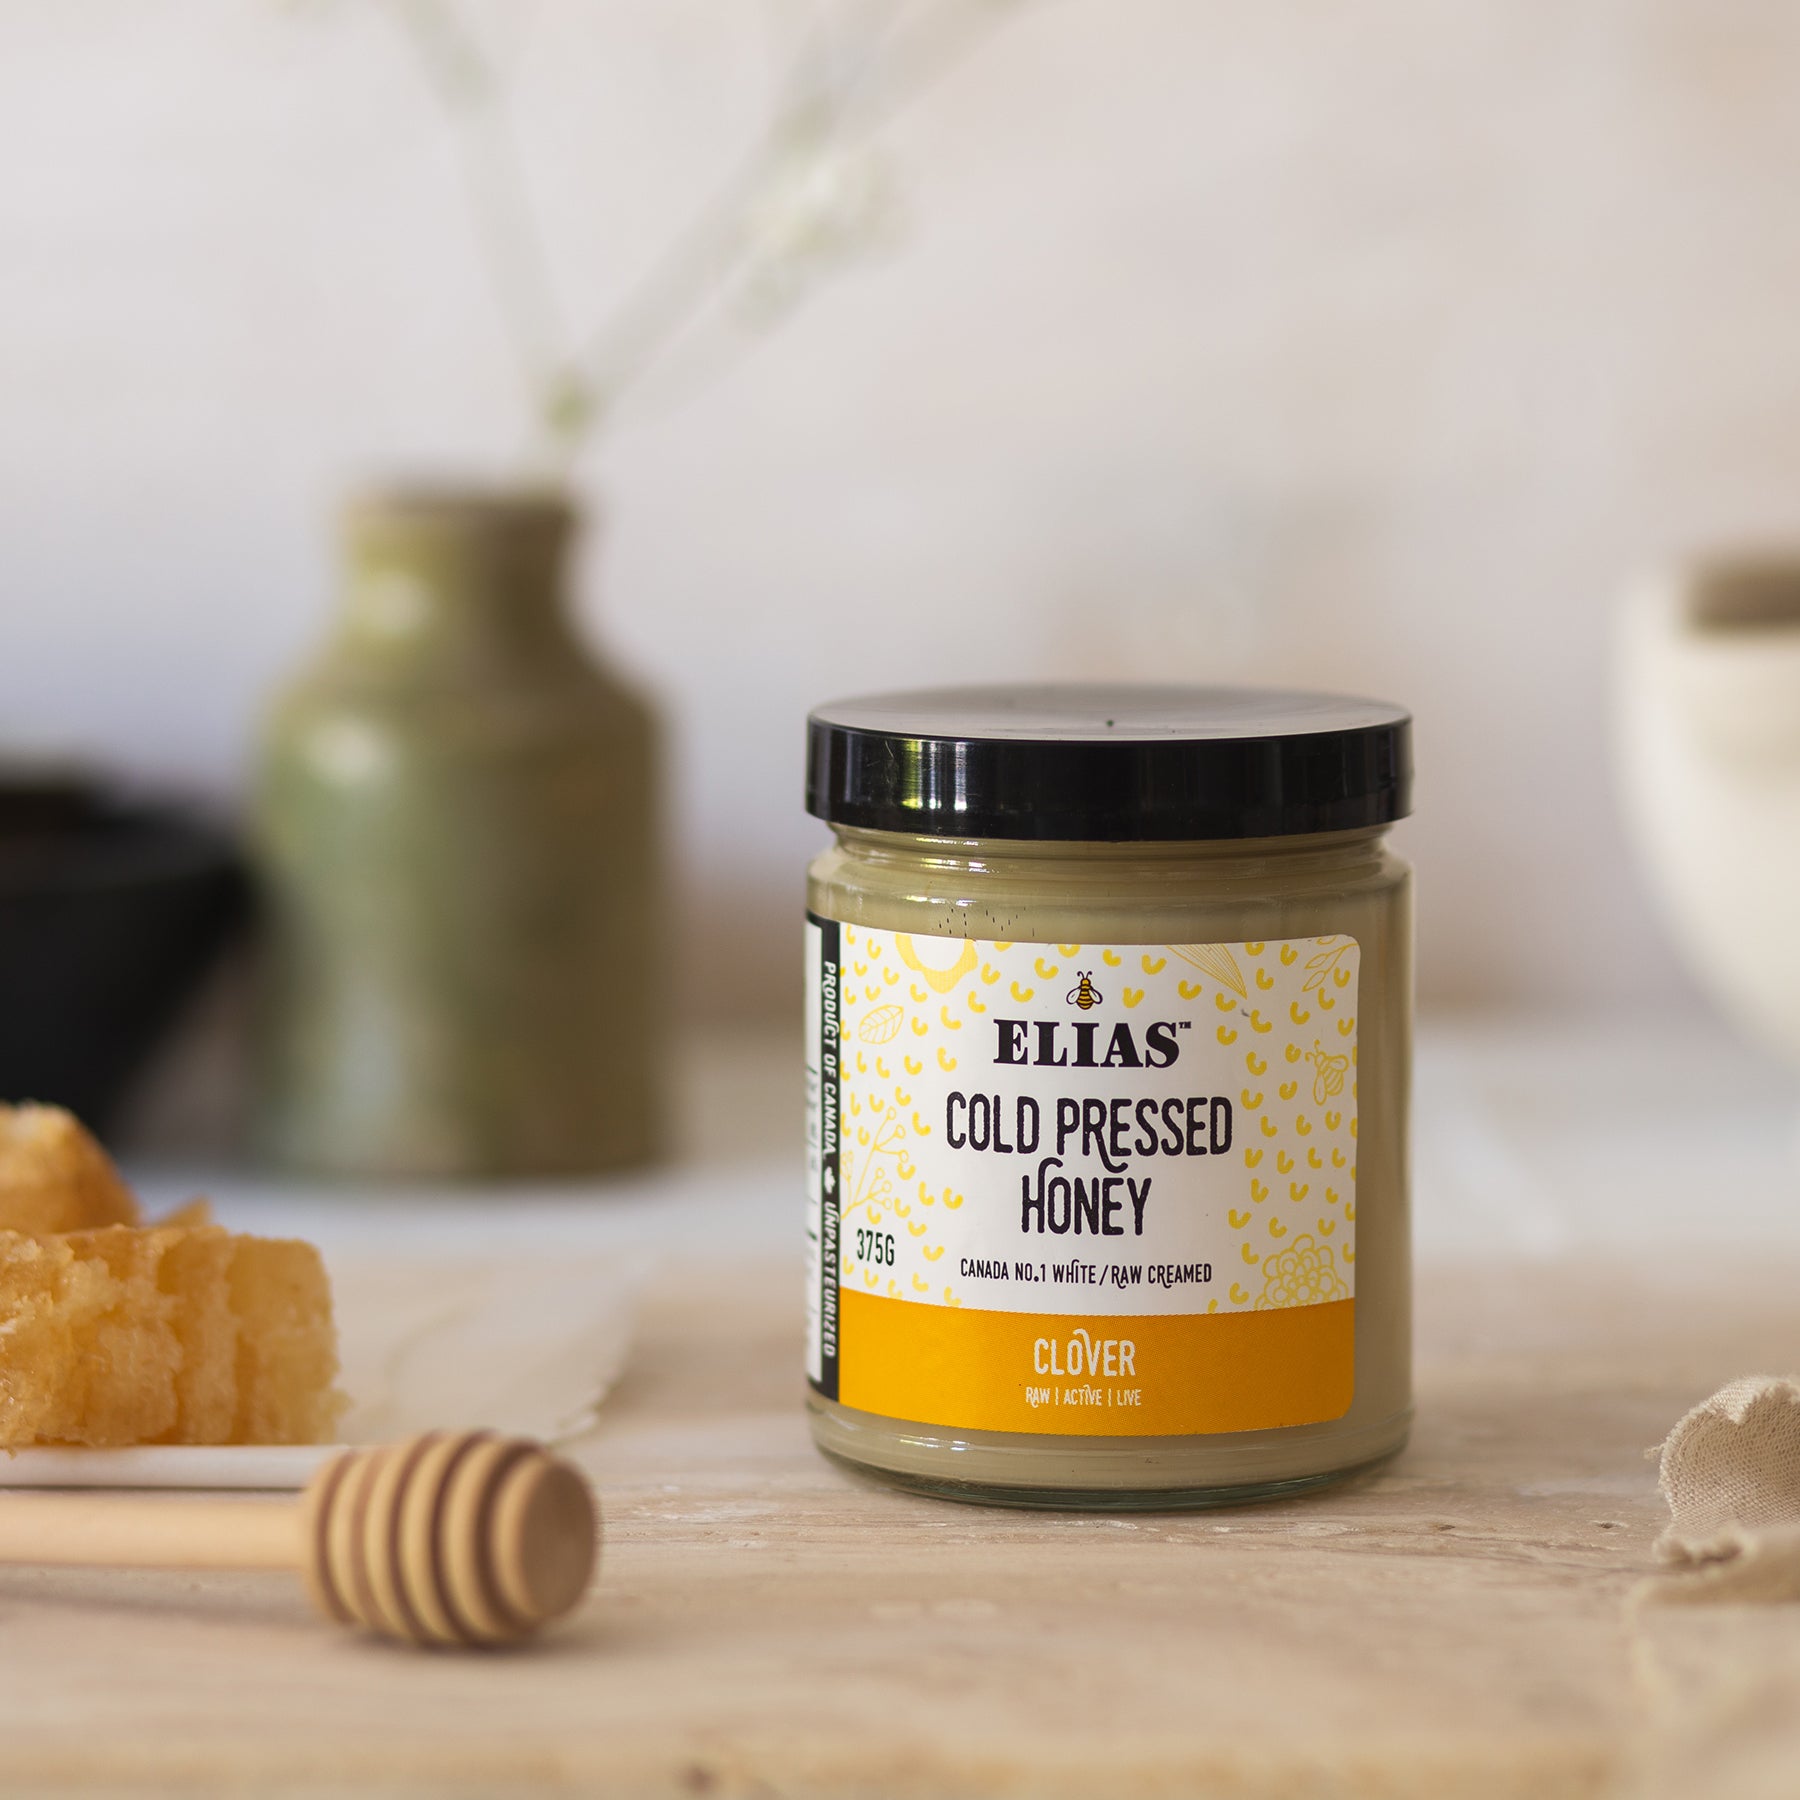 Image of Elias Canadian Cold Pressed Clover Honey in front of a vase and flowers and beside honeycomb.